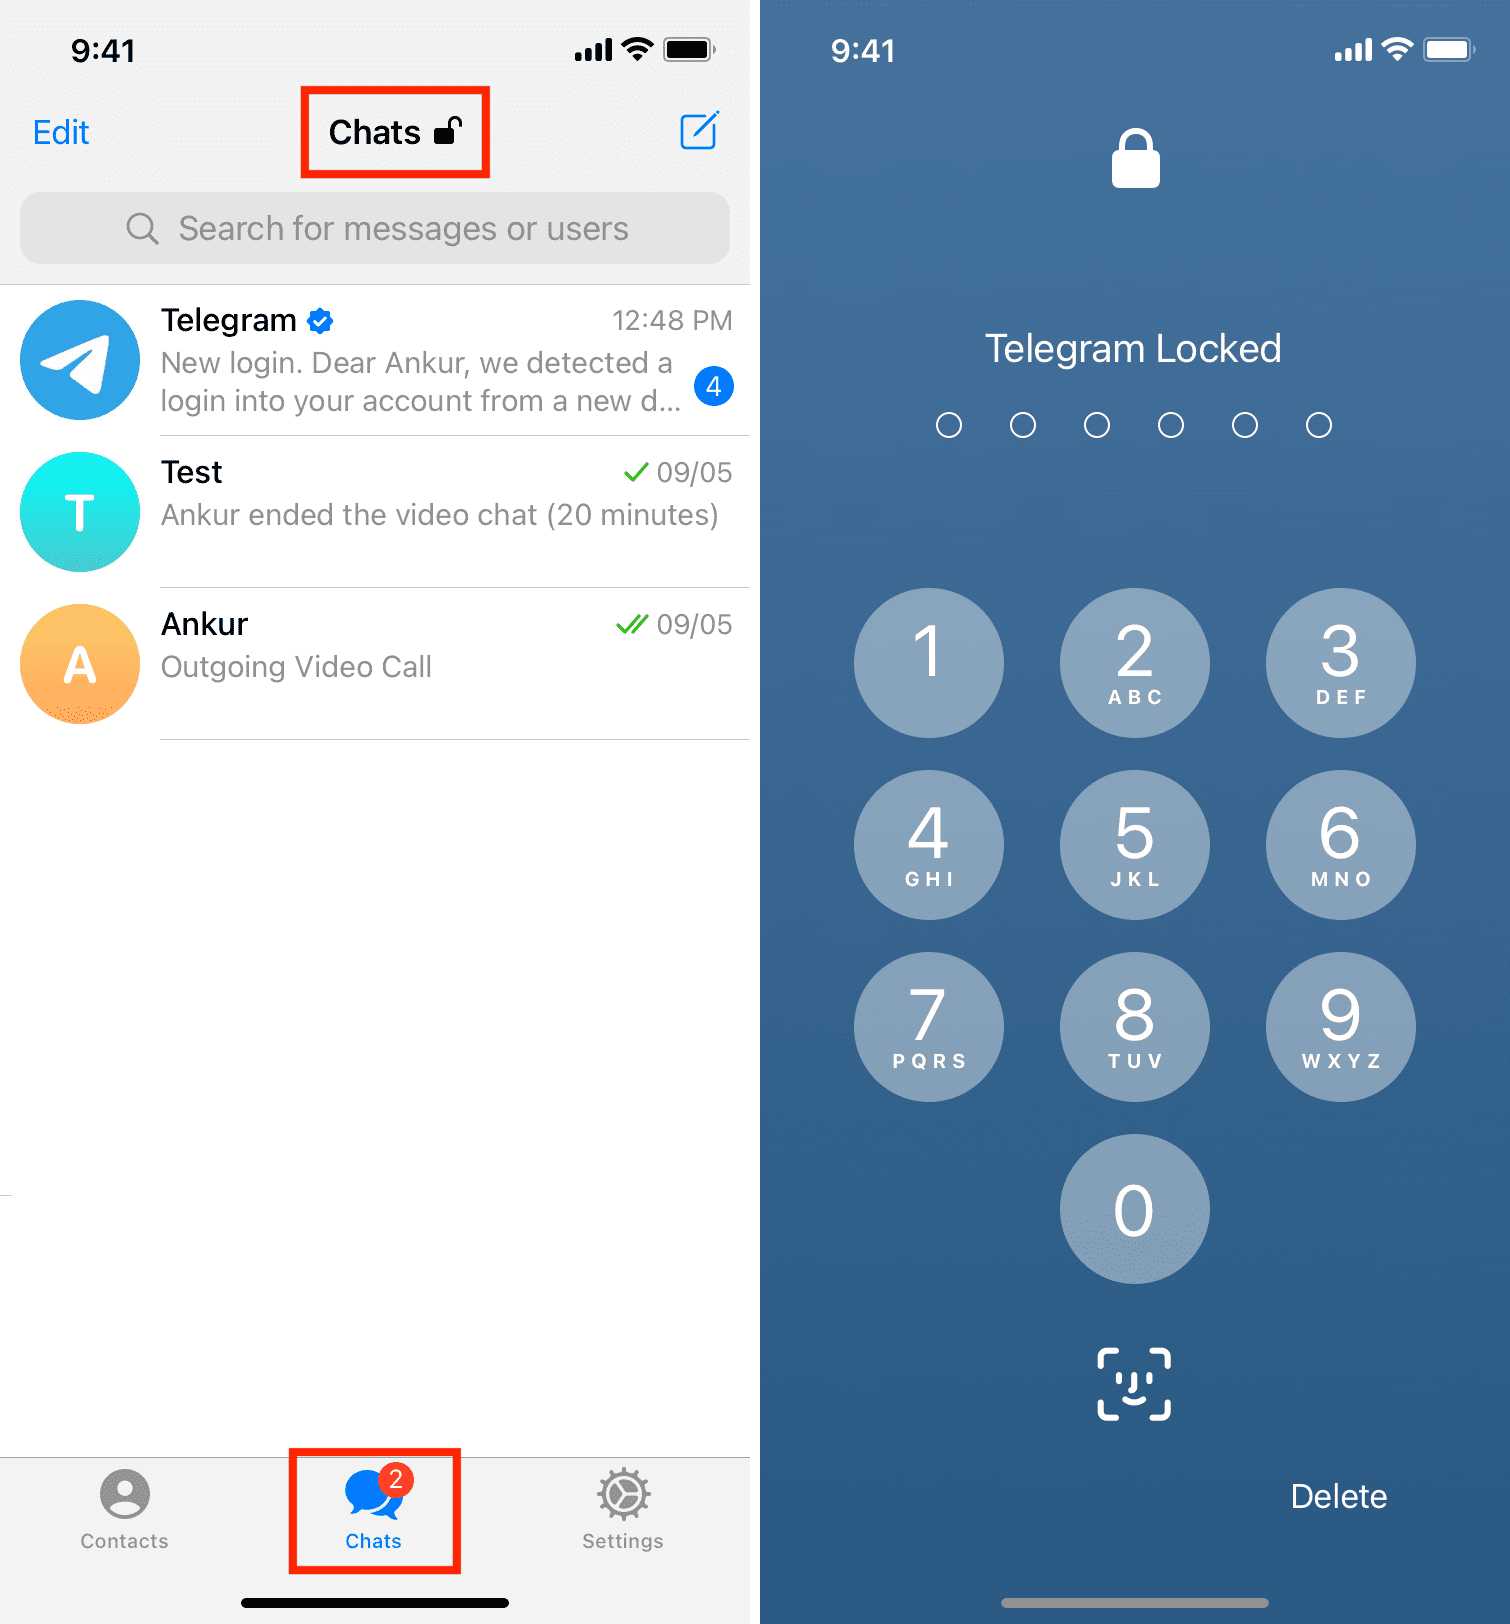 Lock Telegram app whenever you want by tapping lock button